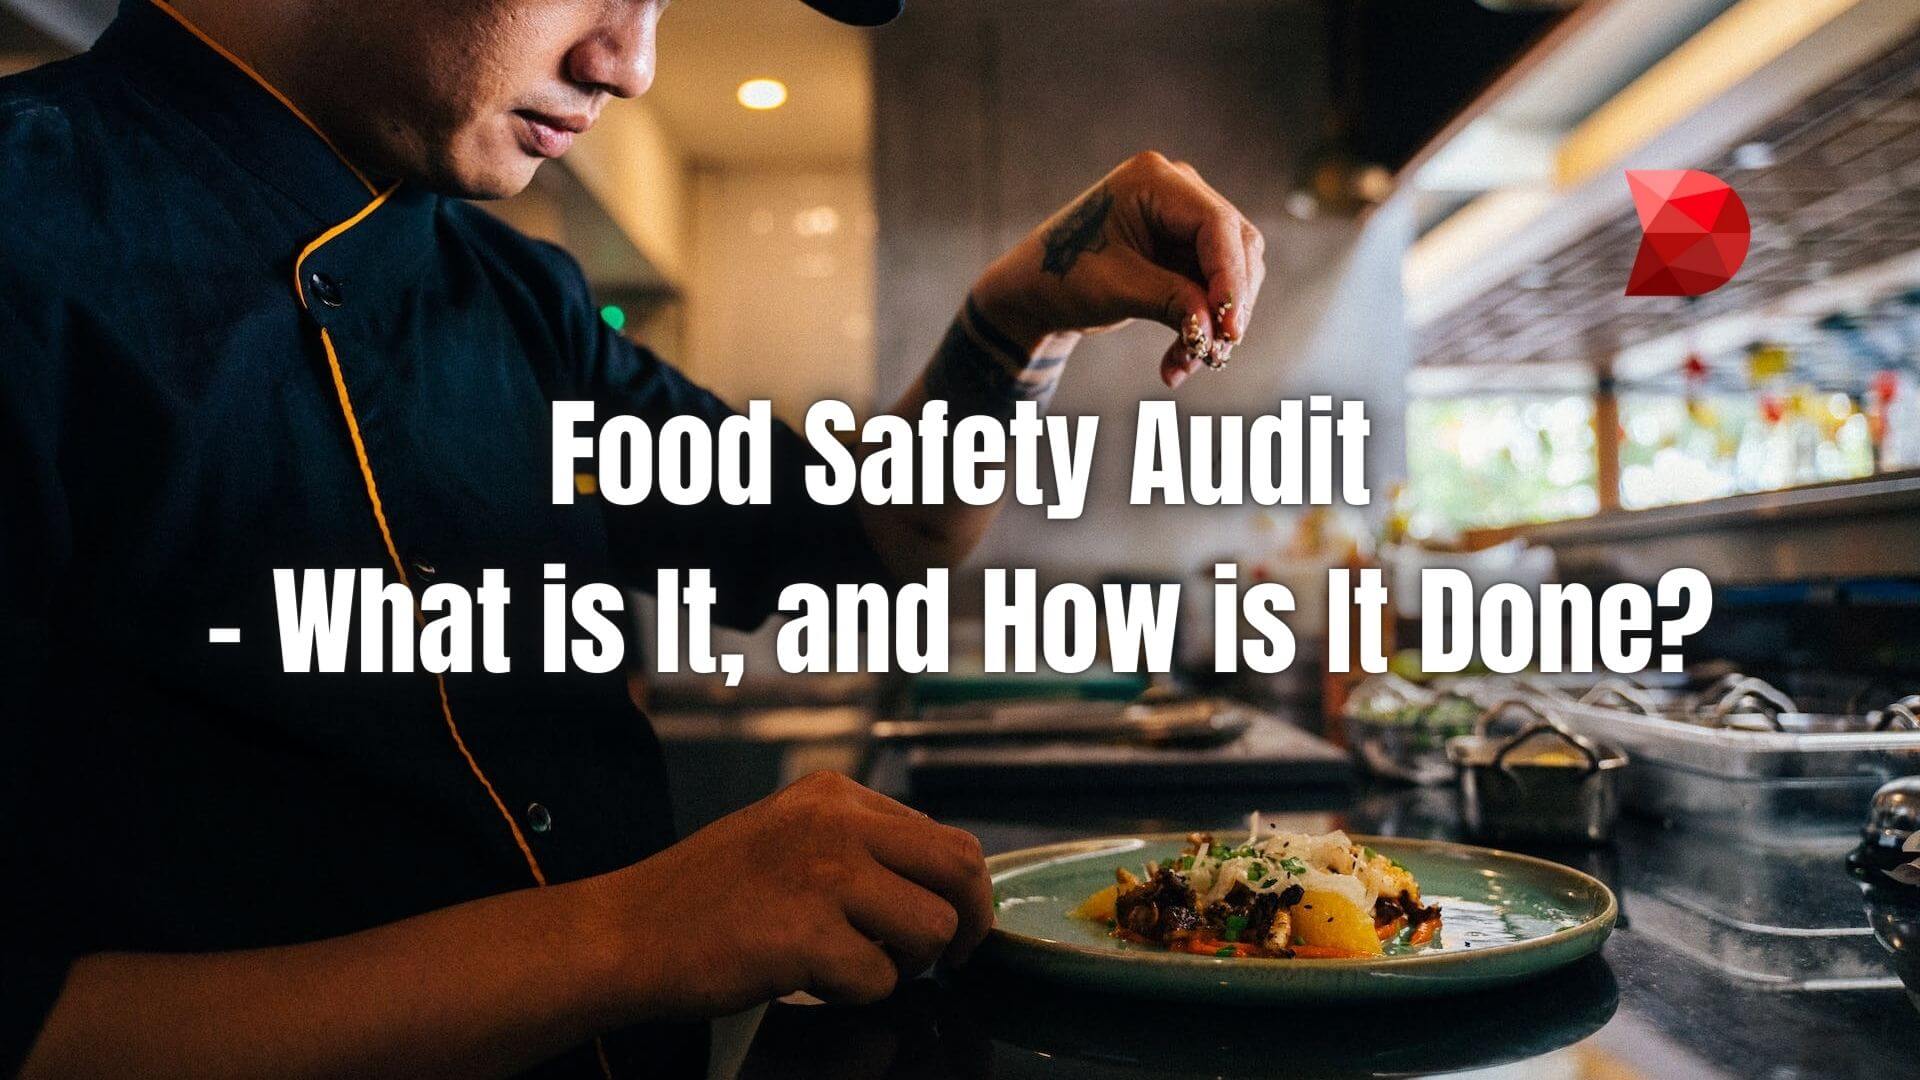 Uncover the secrets of food safety audits in our comprehensive guide. Learn the 'whats' and 'hows' to ensure a secure culinary environment.